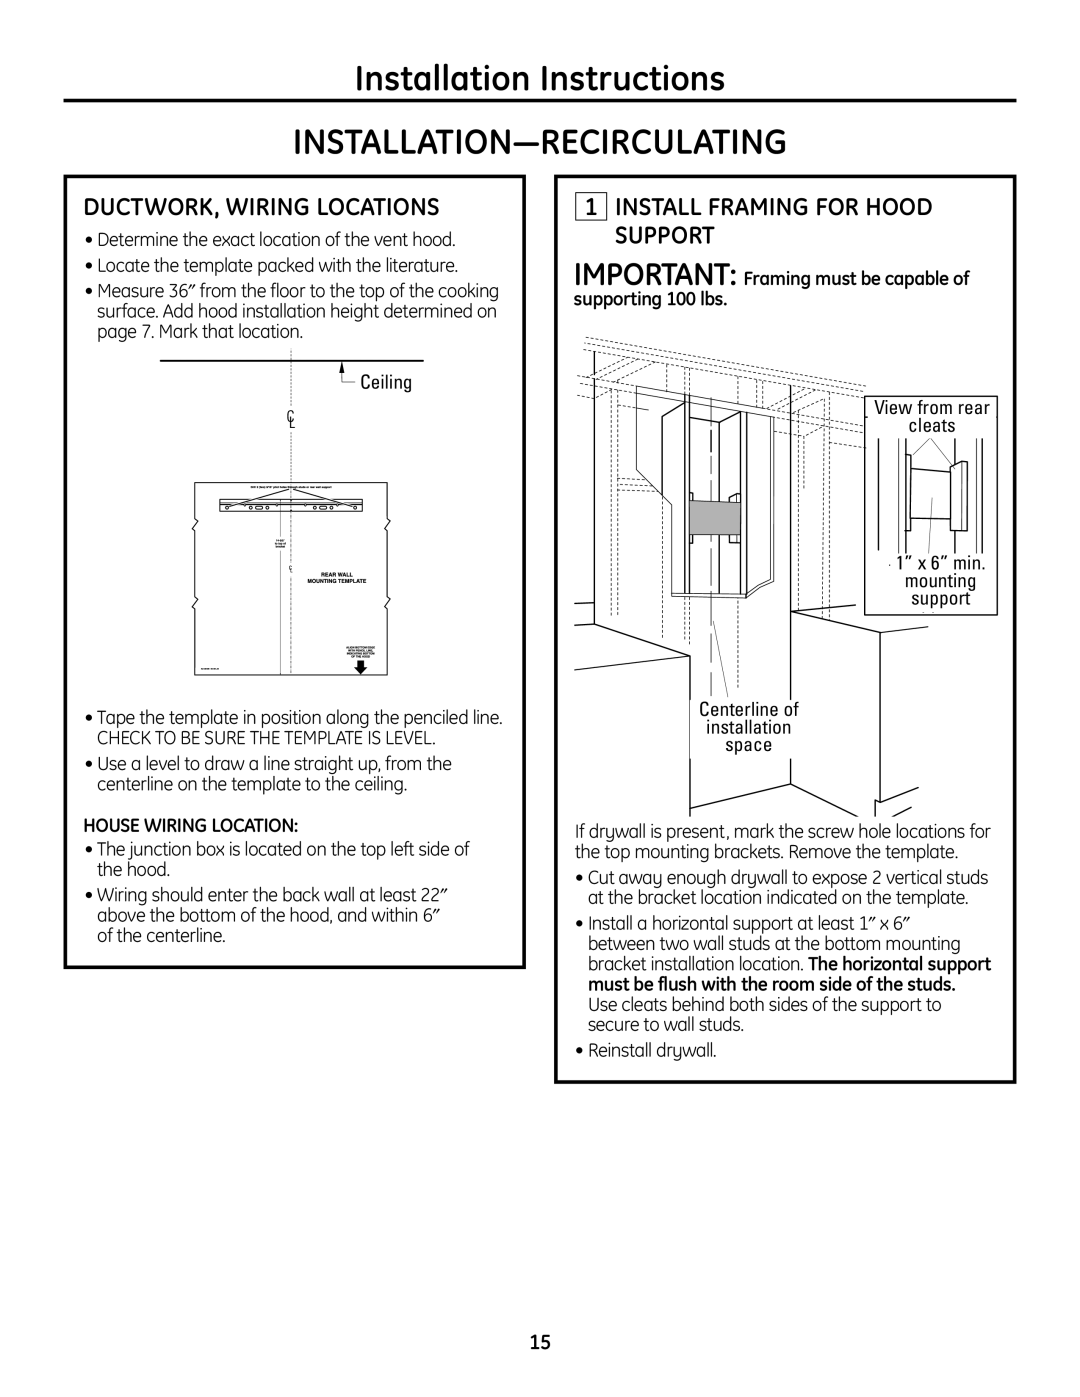 GE ZV900 Installation Instructions INSTALLATION-RECIRCULATING, IMPORTANT Framing must be capable of supporting 100 lbs 